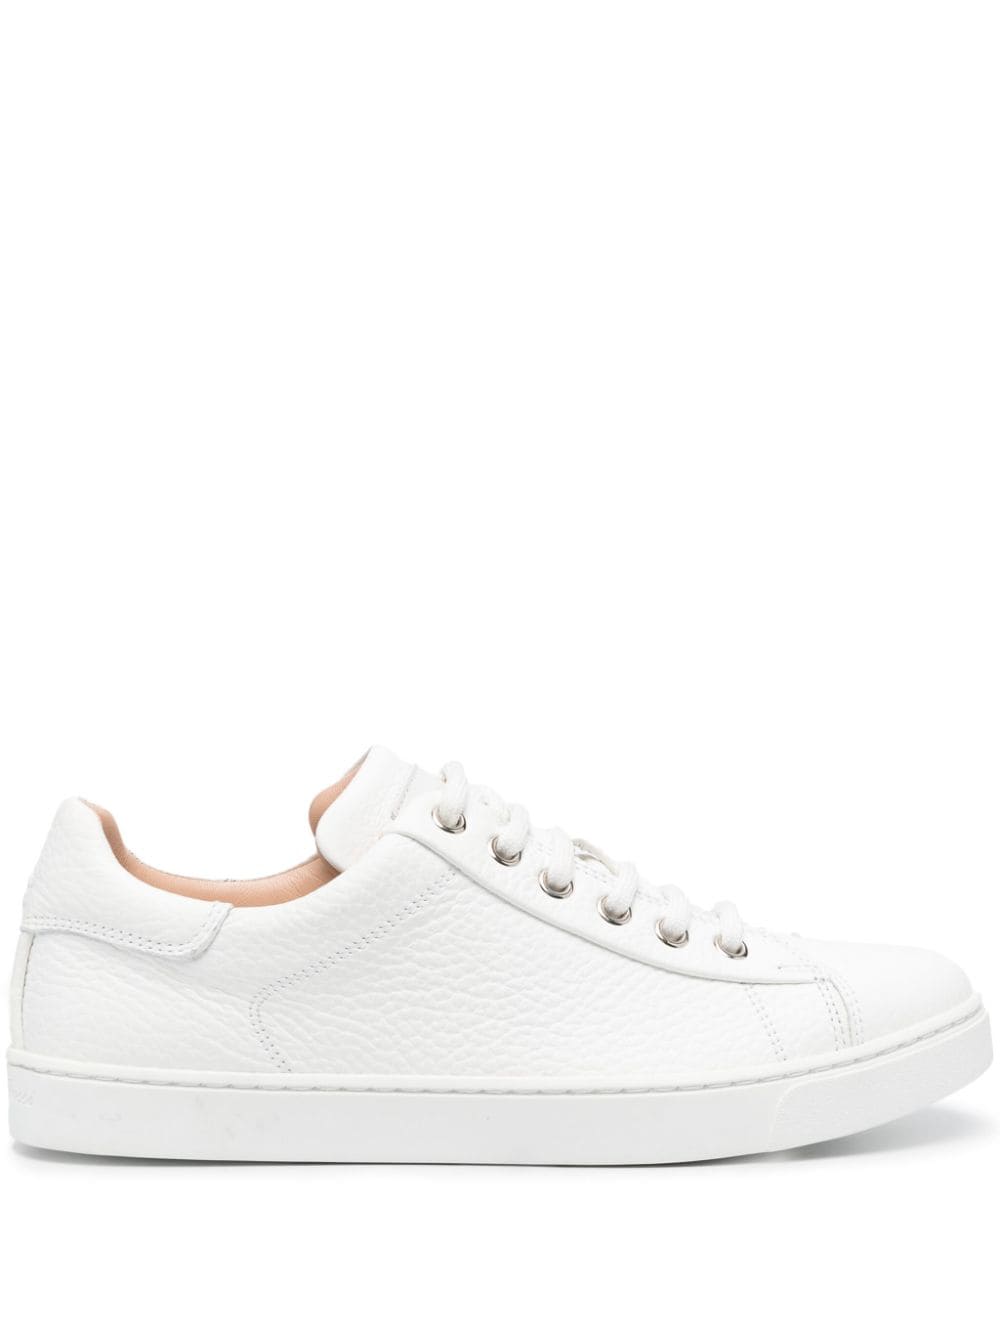 Gianvito Rossi Lace-up Leather Sneakers In White